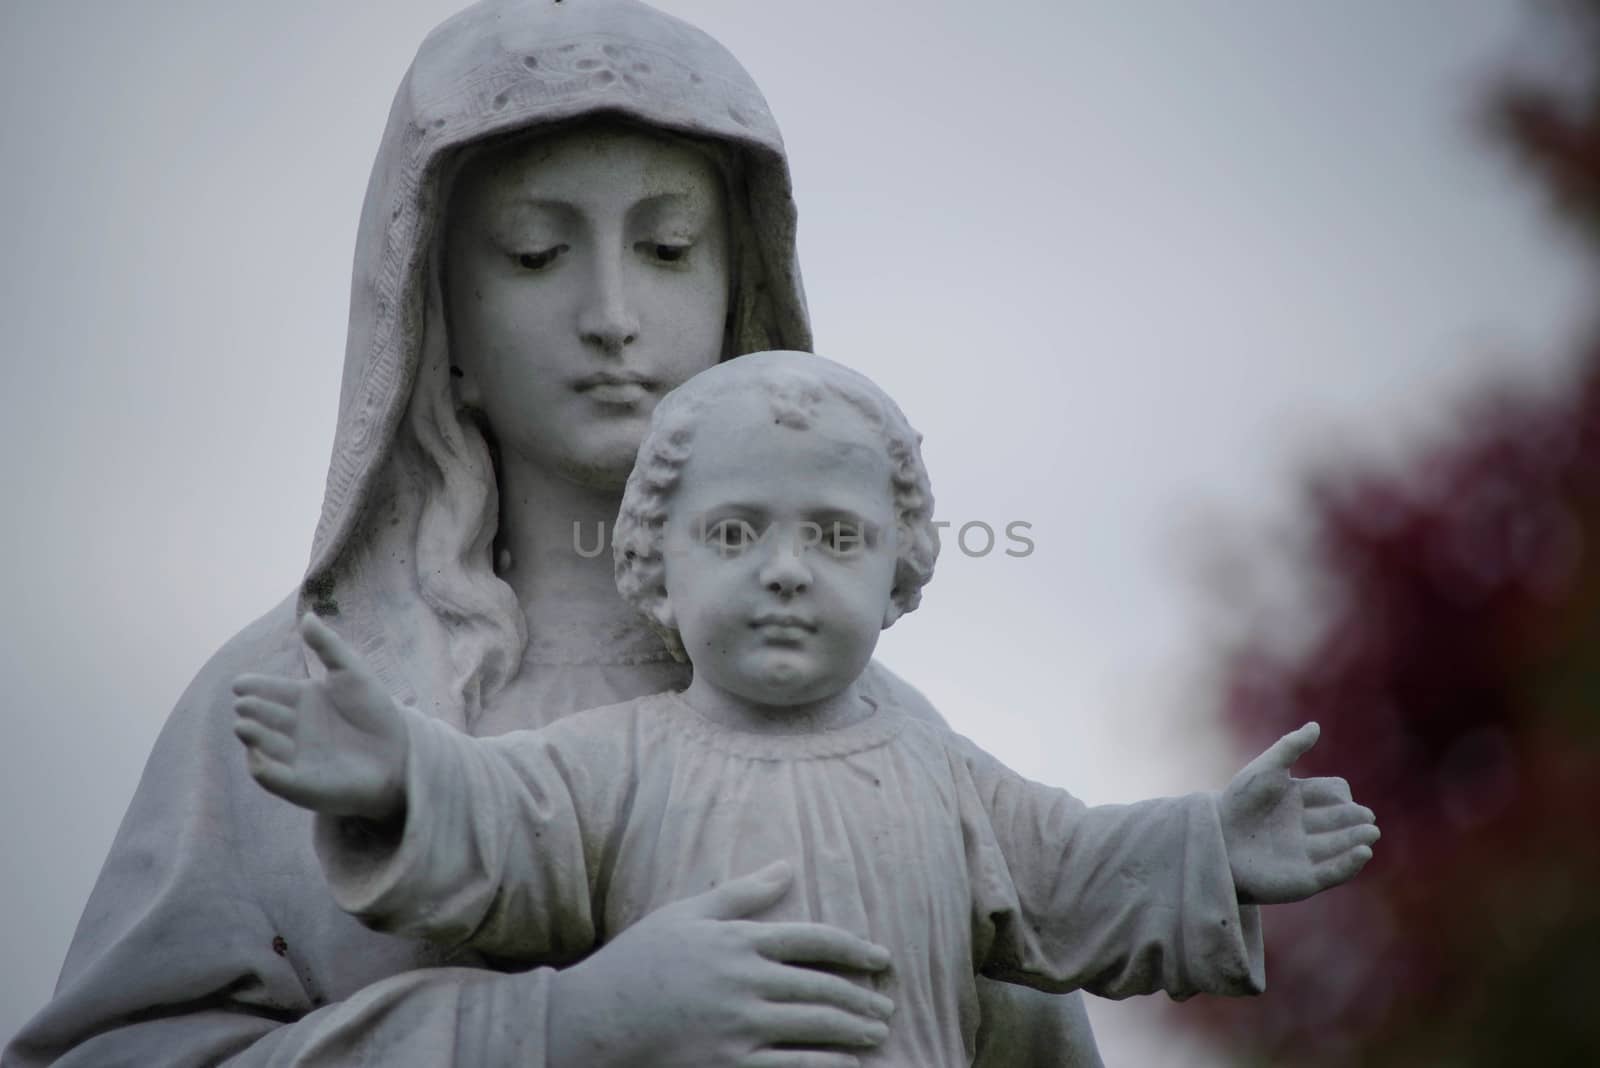 Christ Child cemetery stature with outstretched arms by marysalen